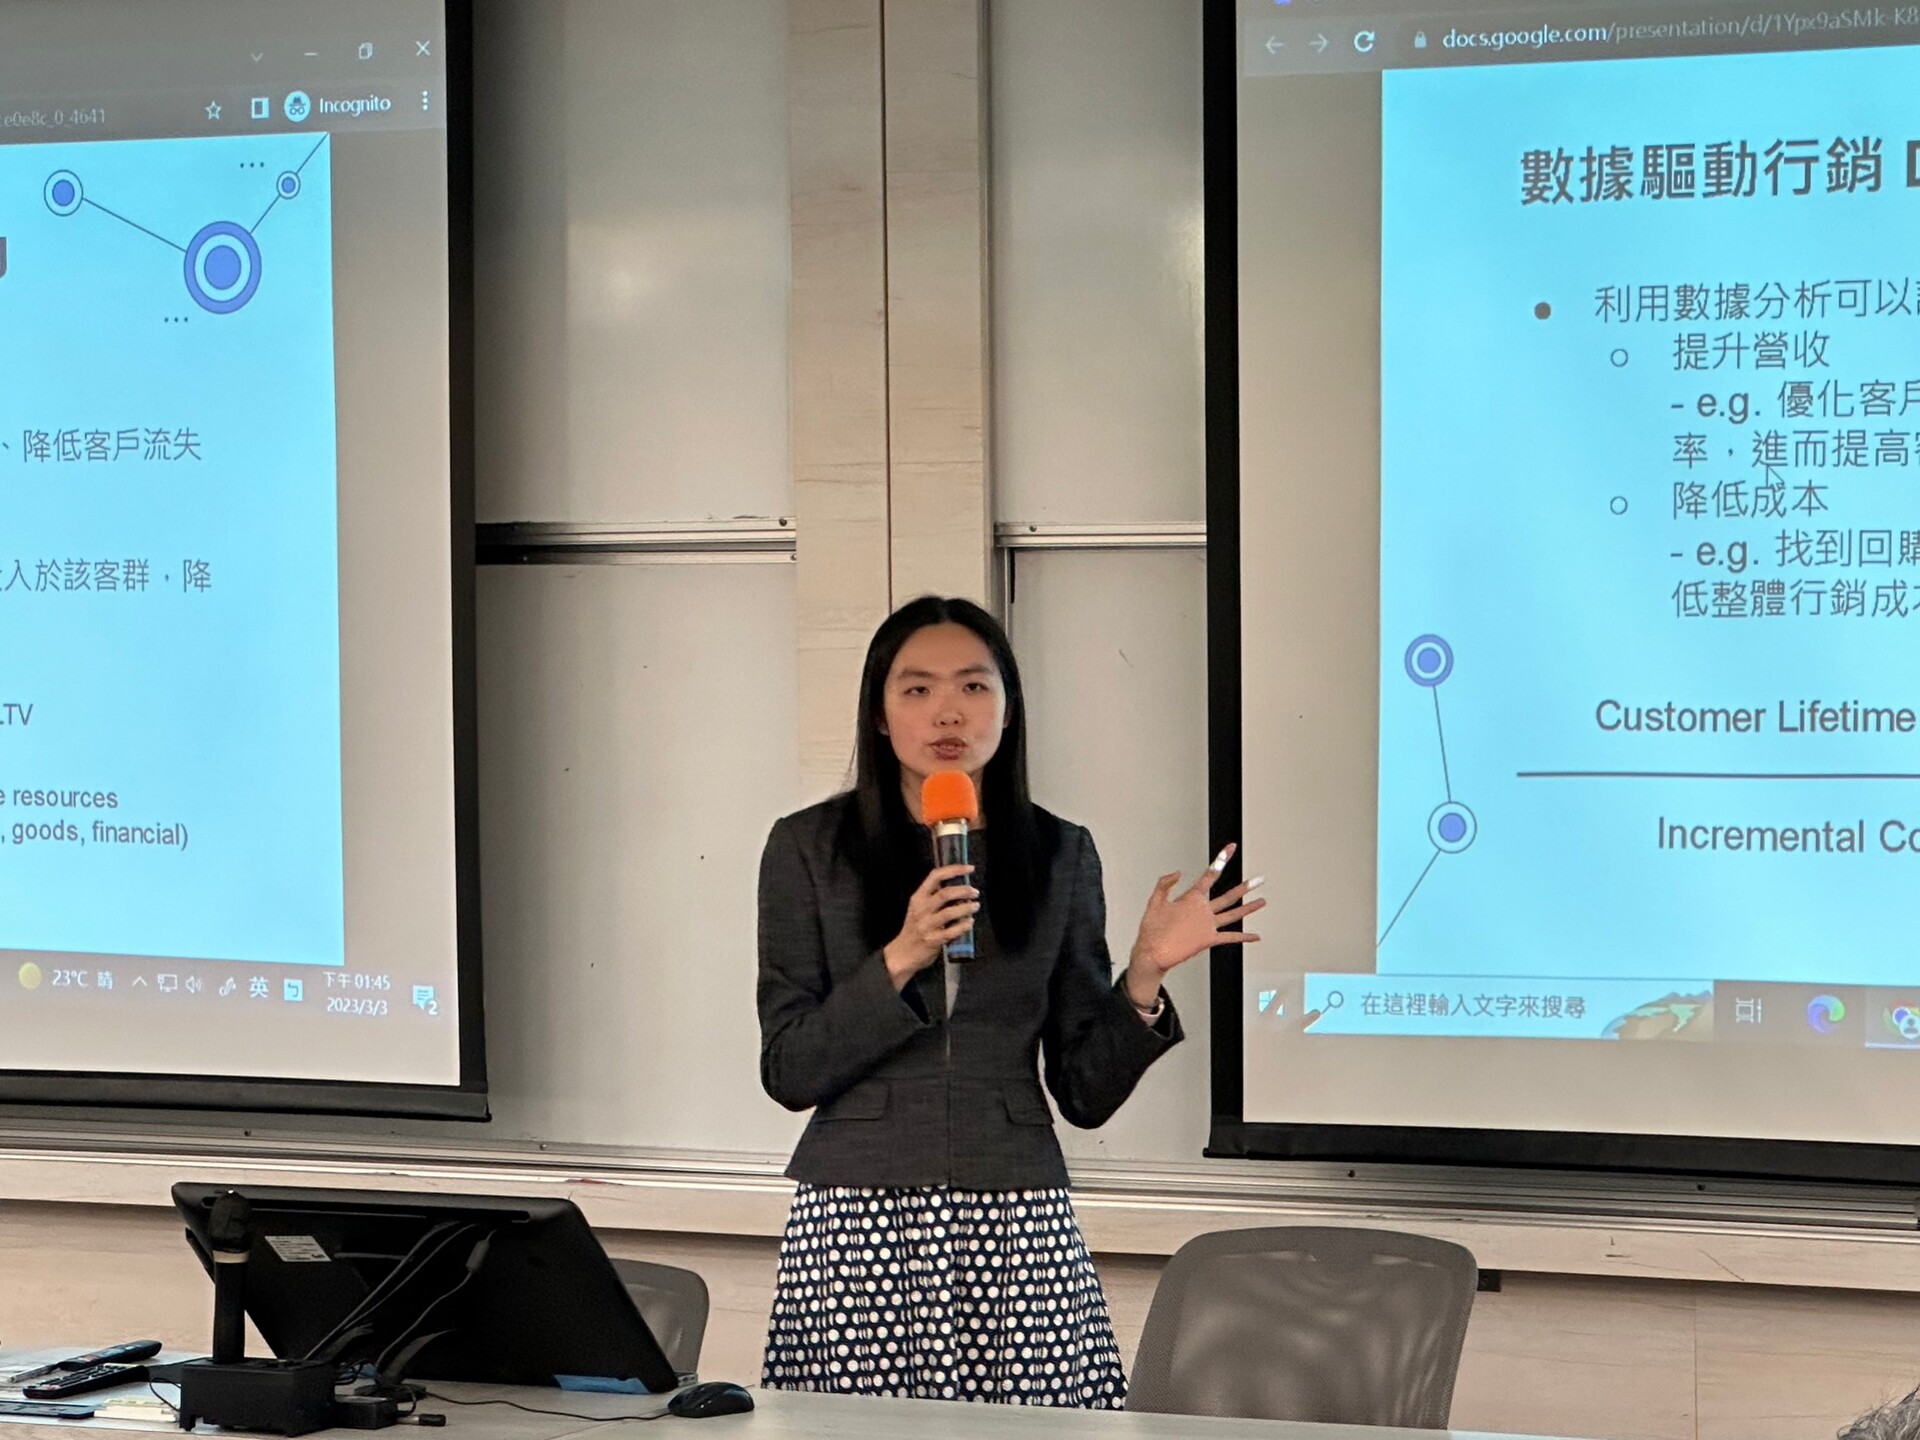 Angie Shao-ting Hsu explains the role of data in the consumer process